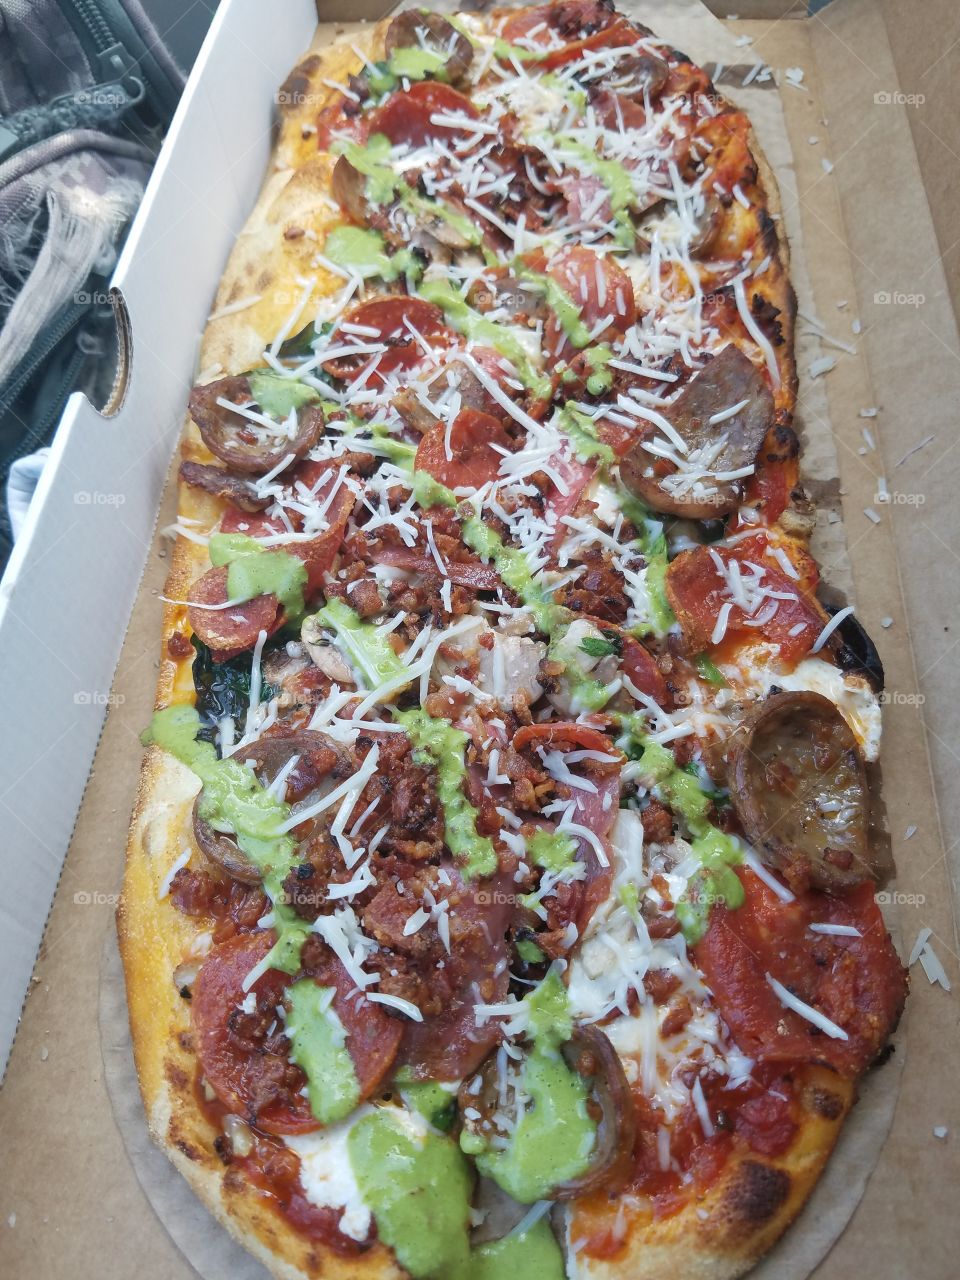 All-meat Pizza with even more meat!